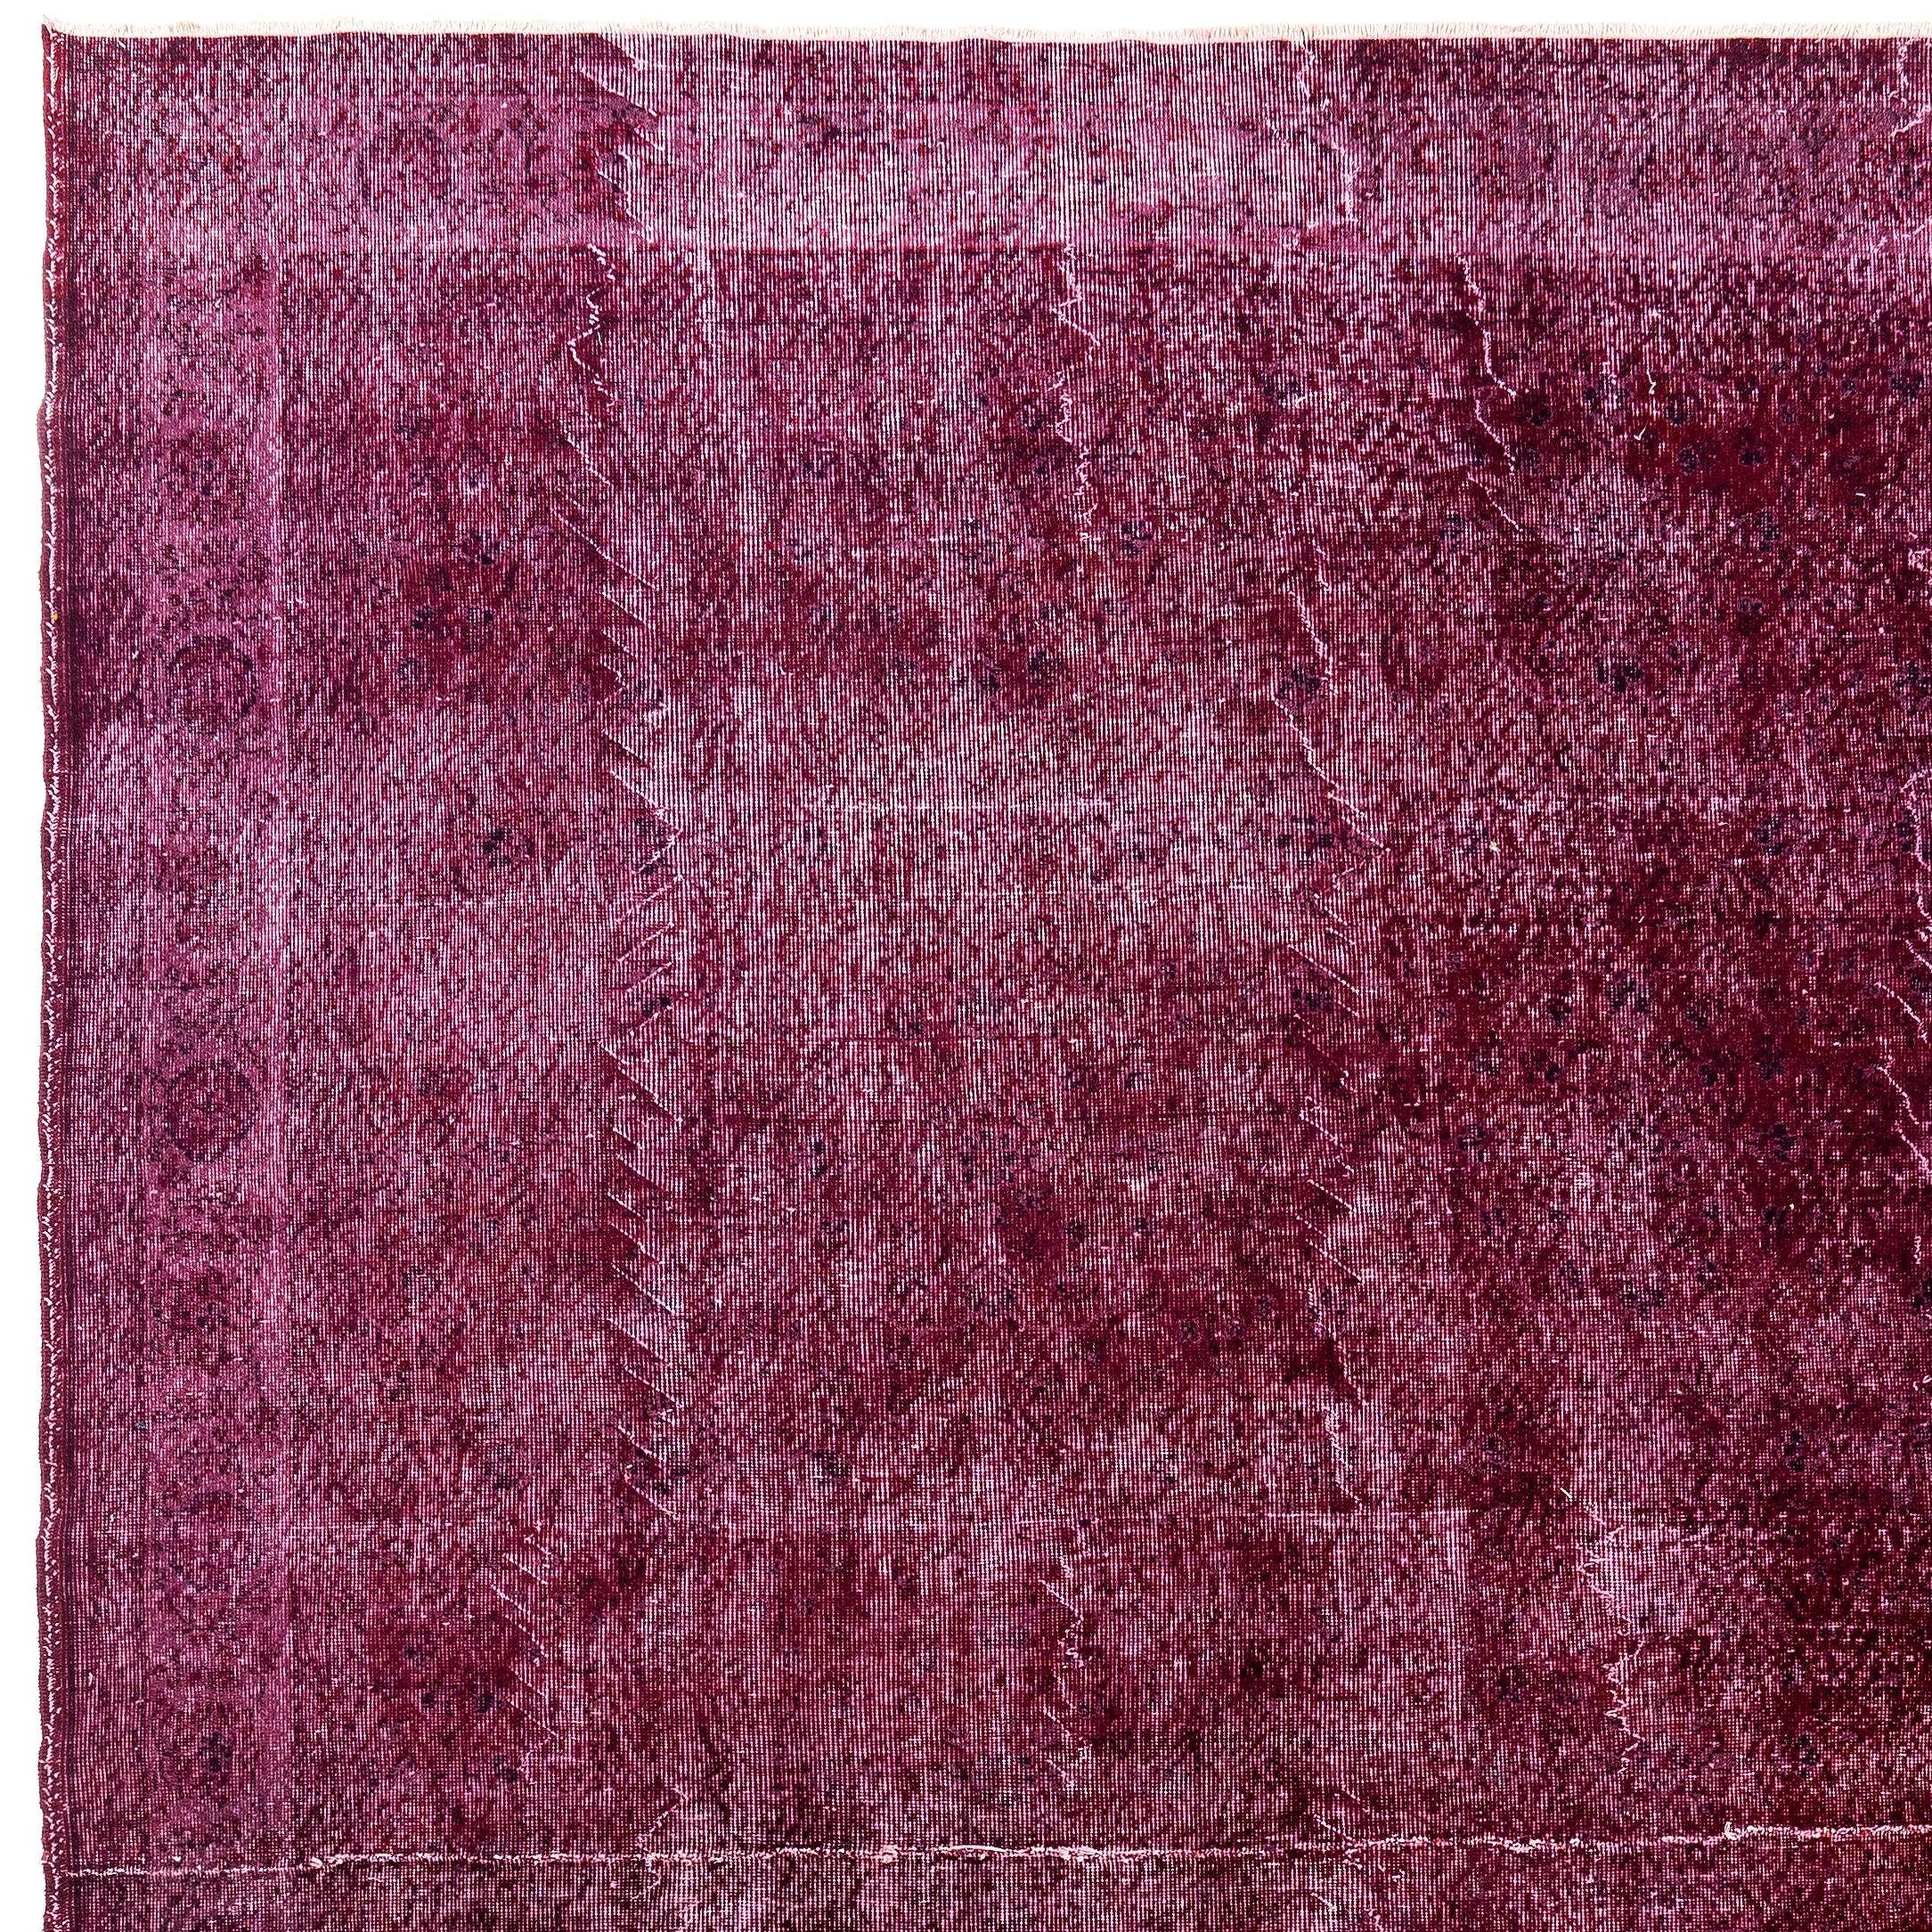 A large hand-knotted Turkish area rug over-dyed in maroon red.
It is finely hand-knotted with low wool pile on cotton foundation, in good condition with no issues, sturdy, professionally cleaned and suitable for high foot traffic.
Size: 9x13 ft